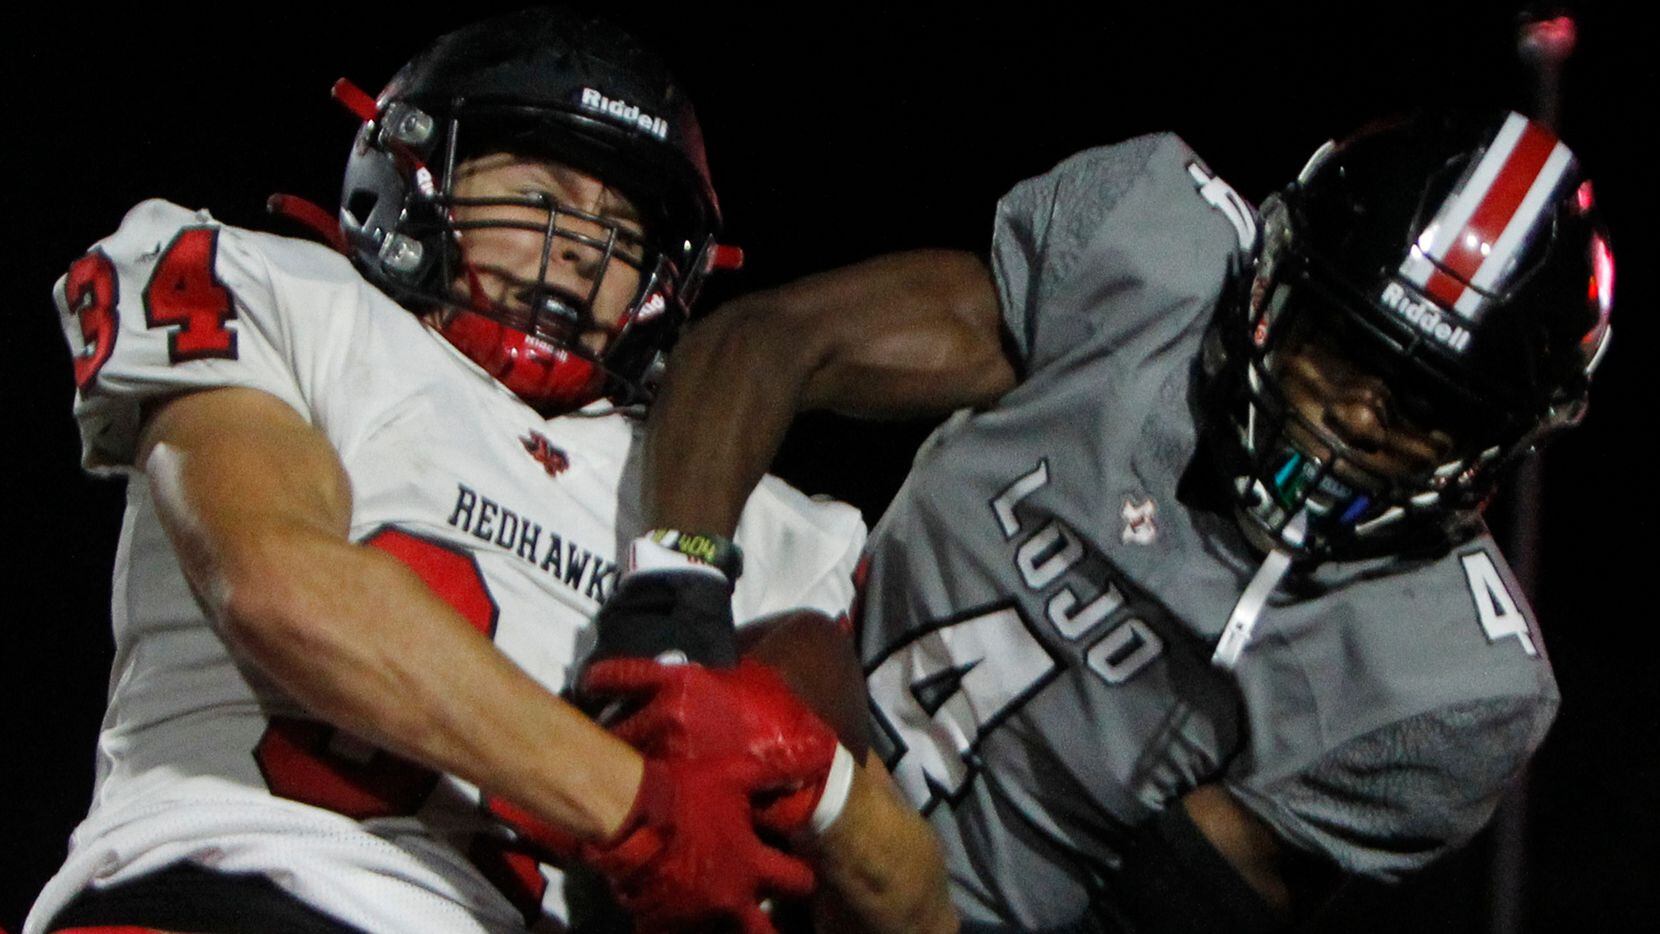 Frisco Liberty safety Sam Wenaas (34), left, wrestles away a pass  intended for Lucas...